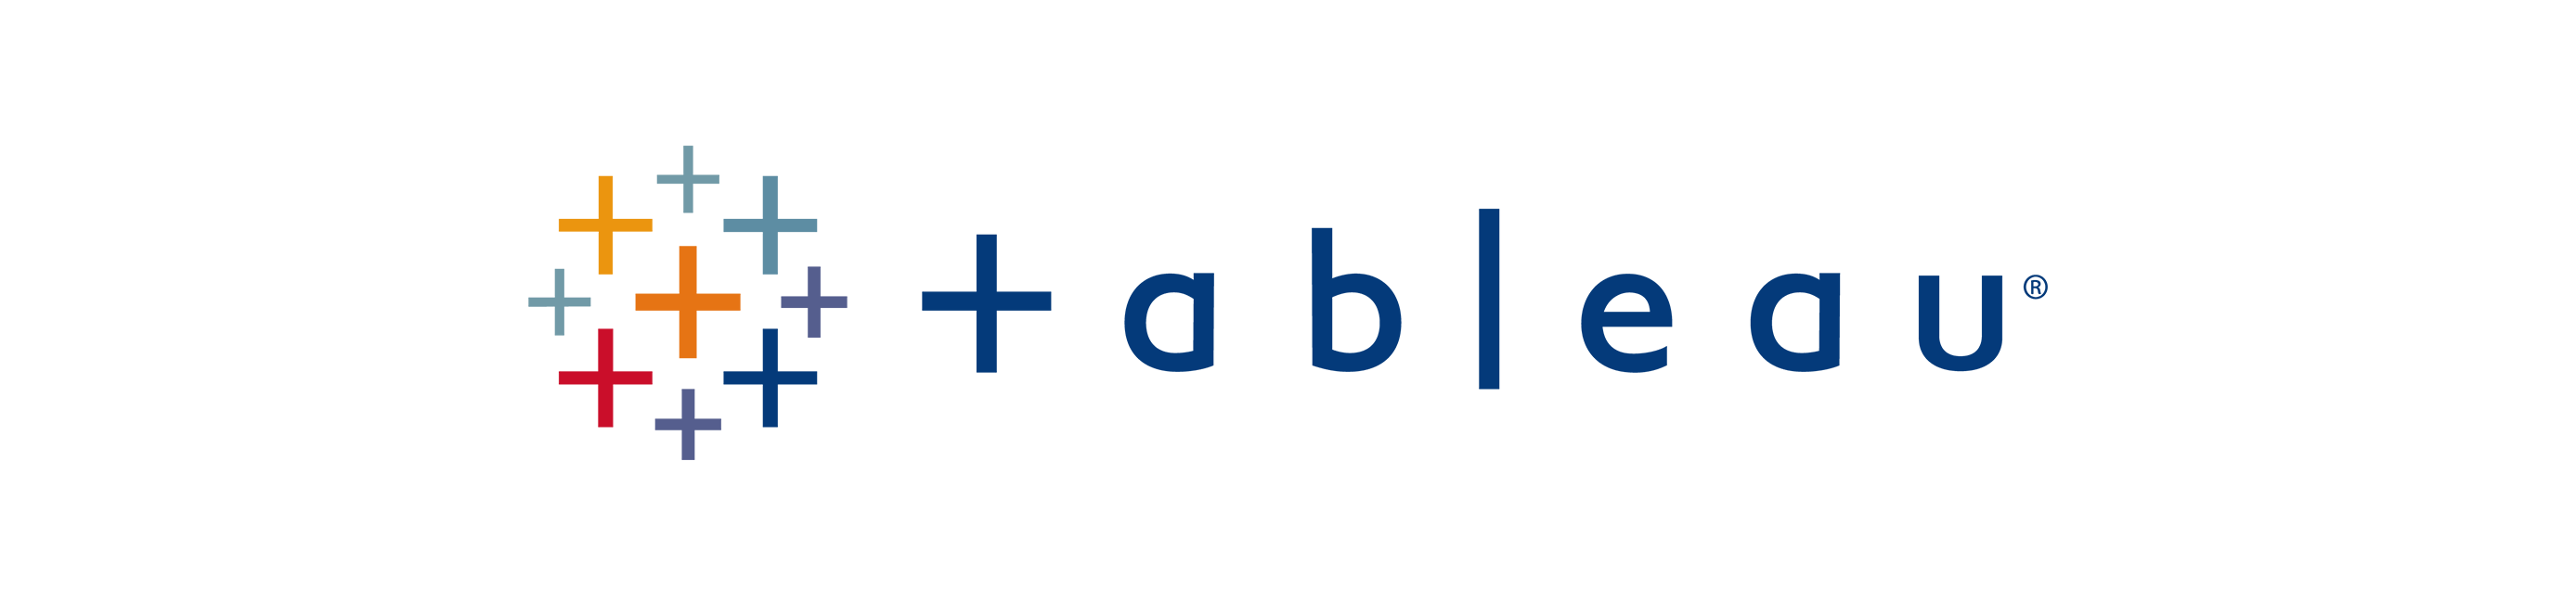 tableau-LOGO-new.png